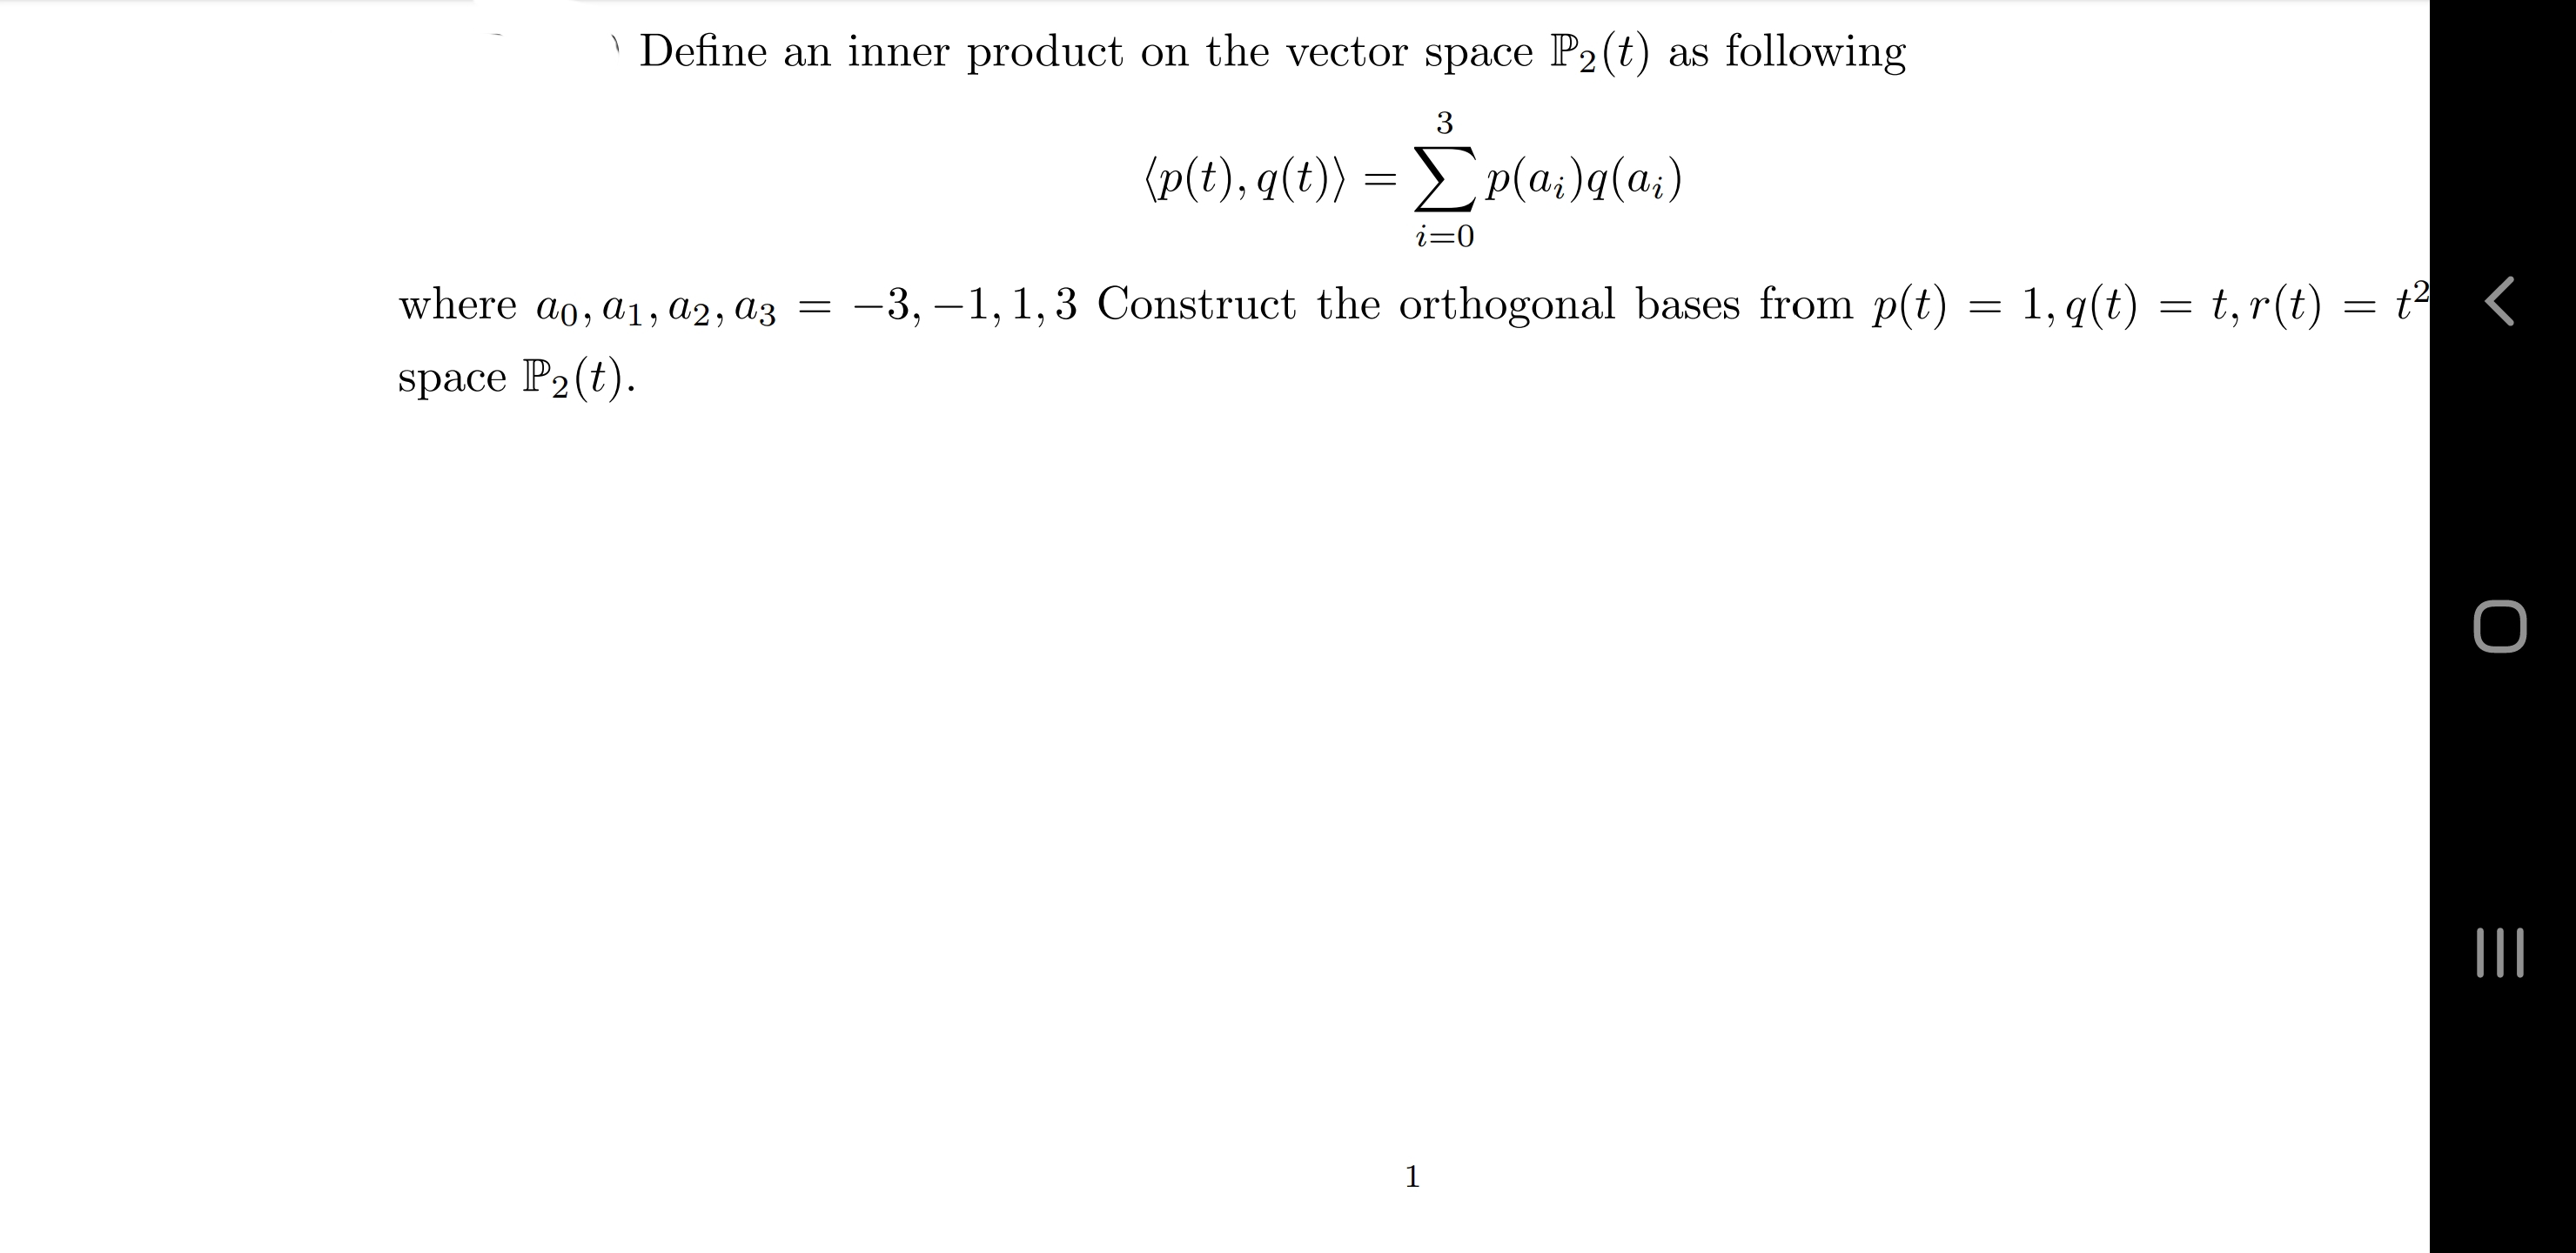 ' Define an inner product on the vector space P2(t) as following
3
(p(), g(t) -Σ α.)g (a,)
i=0
where ao, a1, a2, a3 =
-3, –1, 1,3 Construct the orthogonal bases from p(t) = 1, q(t) = t,r(t)
= t?
space P2(t).
